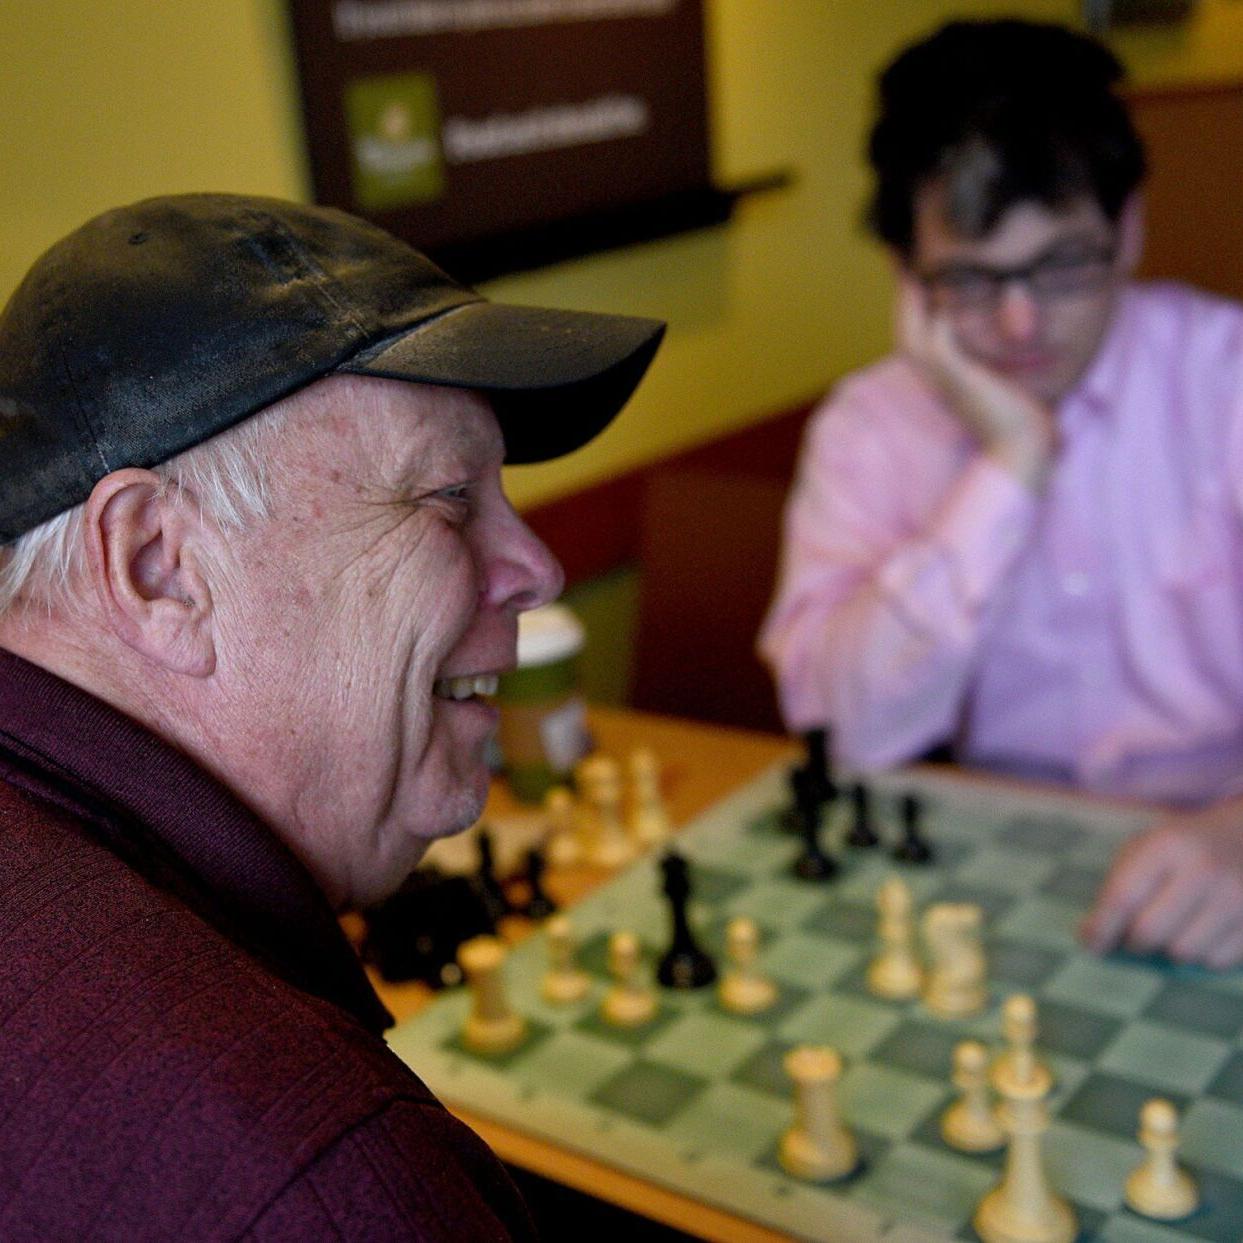 Manchester manufacturer hopes to move its new desk with chess - NH Business  Review